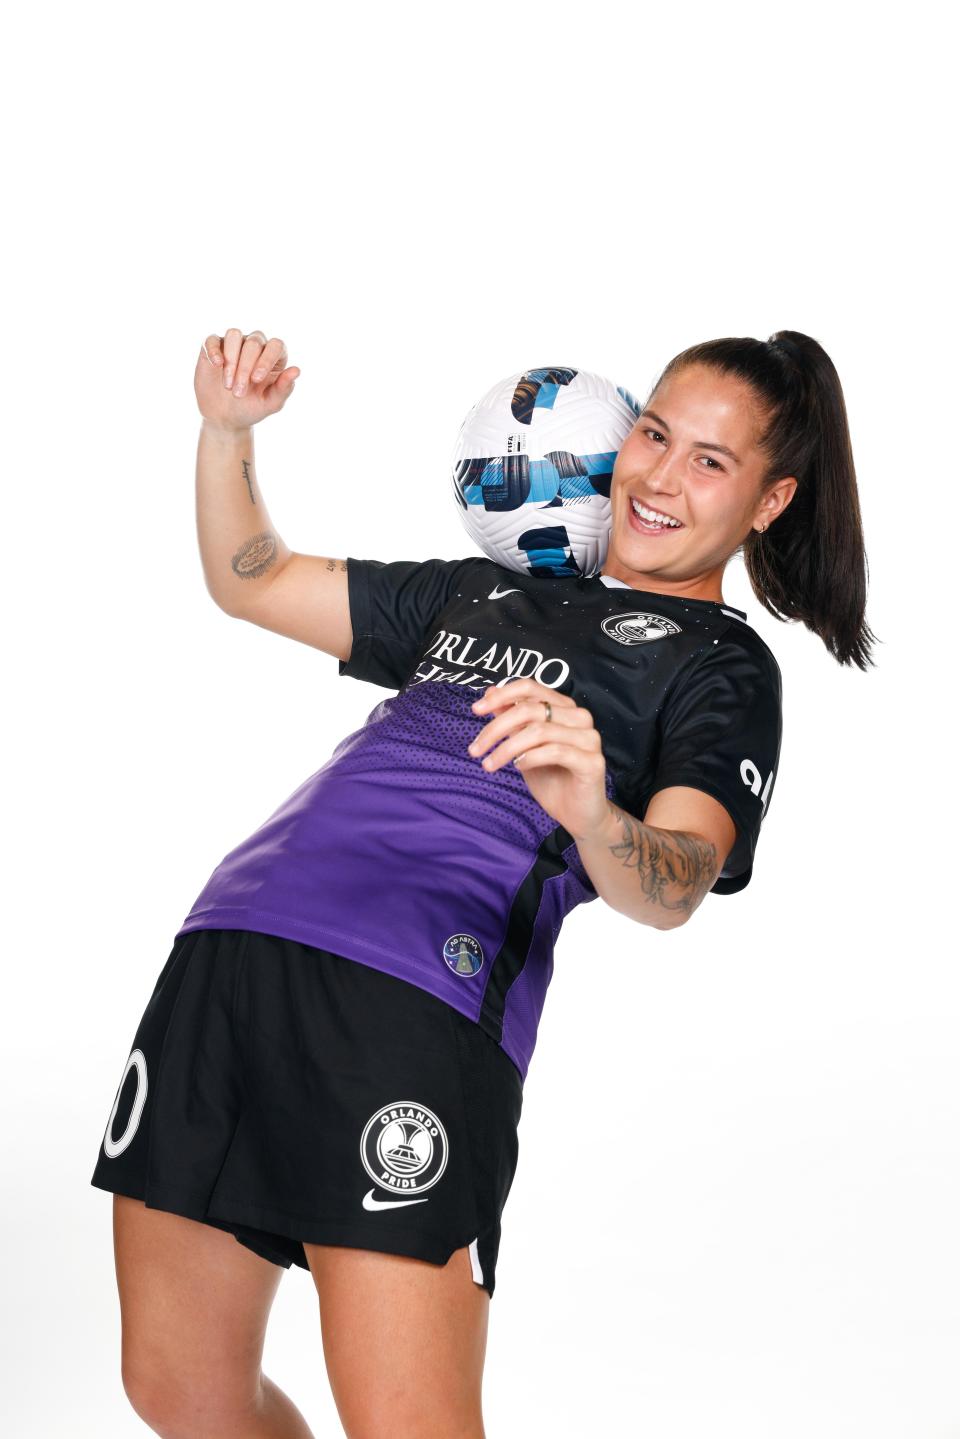 Orlando Pride midfielder Thais Reiss, an All-ASUN selection for the University of North Florida women's soccer team, poses for a 2022 NWSL portrait. Mandatory Credit: NWSL photos via USA TODAY Sports